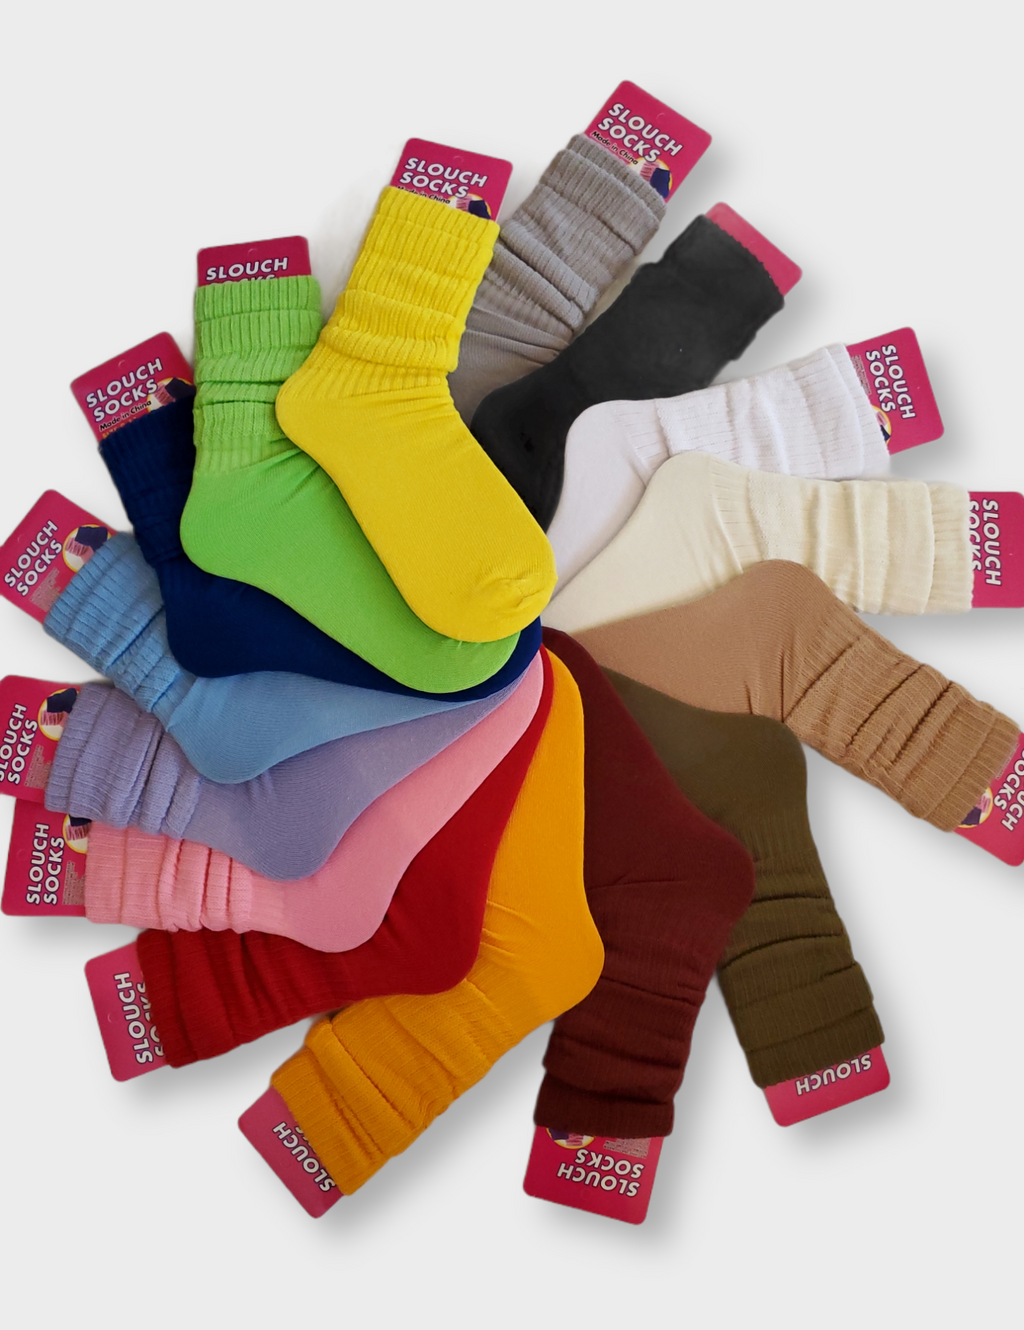 Fabric: 90% Polyester blend, 5% Elastane, 5% Spandex  Soft, cute, stylish and trendy slouch socks  Provides comfort along with a timeless look